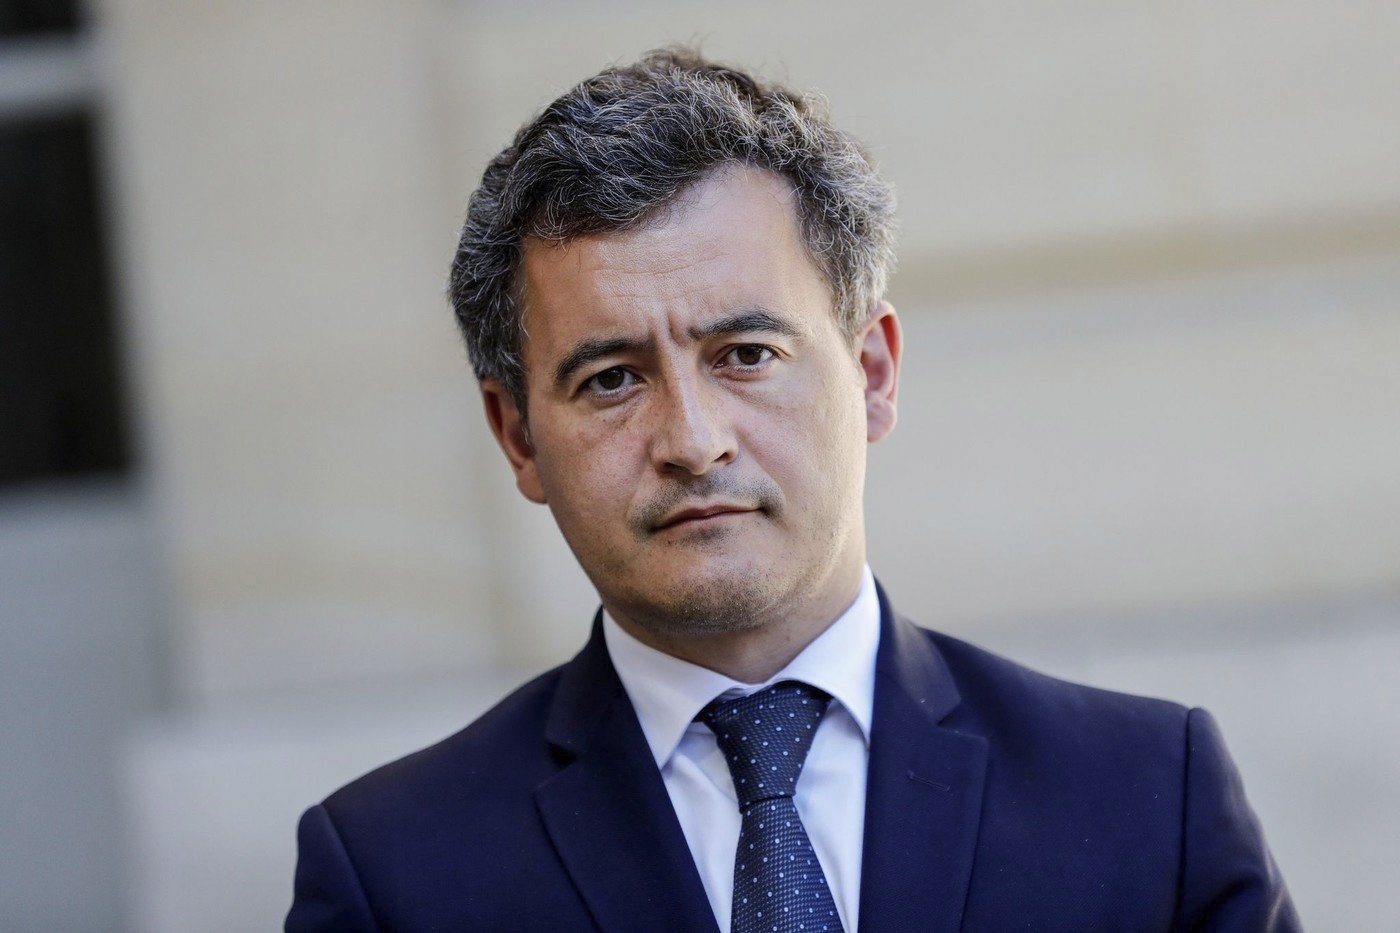 French Interior Minister Gérald Darmanin applauded the prompt response by the police in the Paris railway station attack 